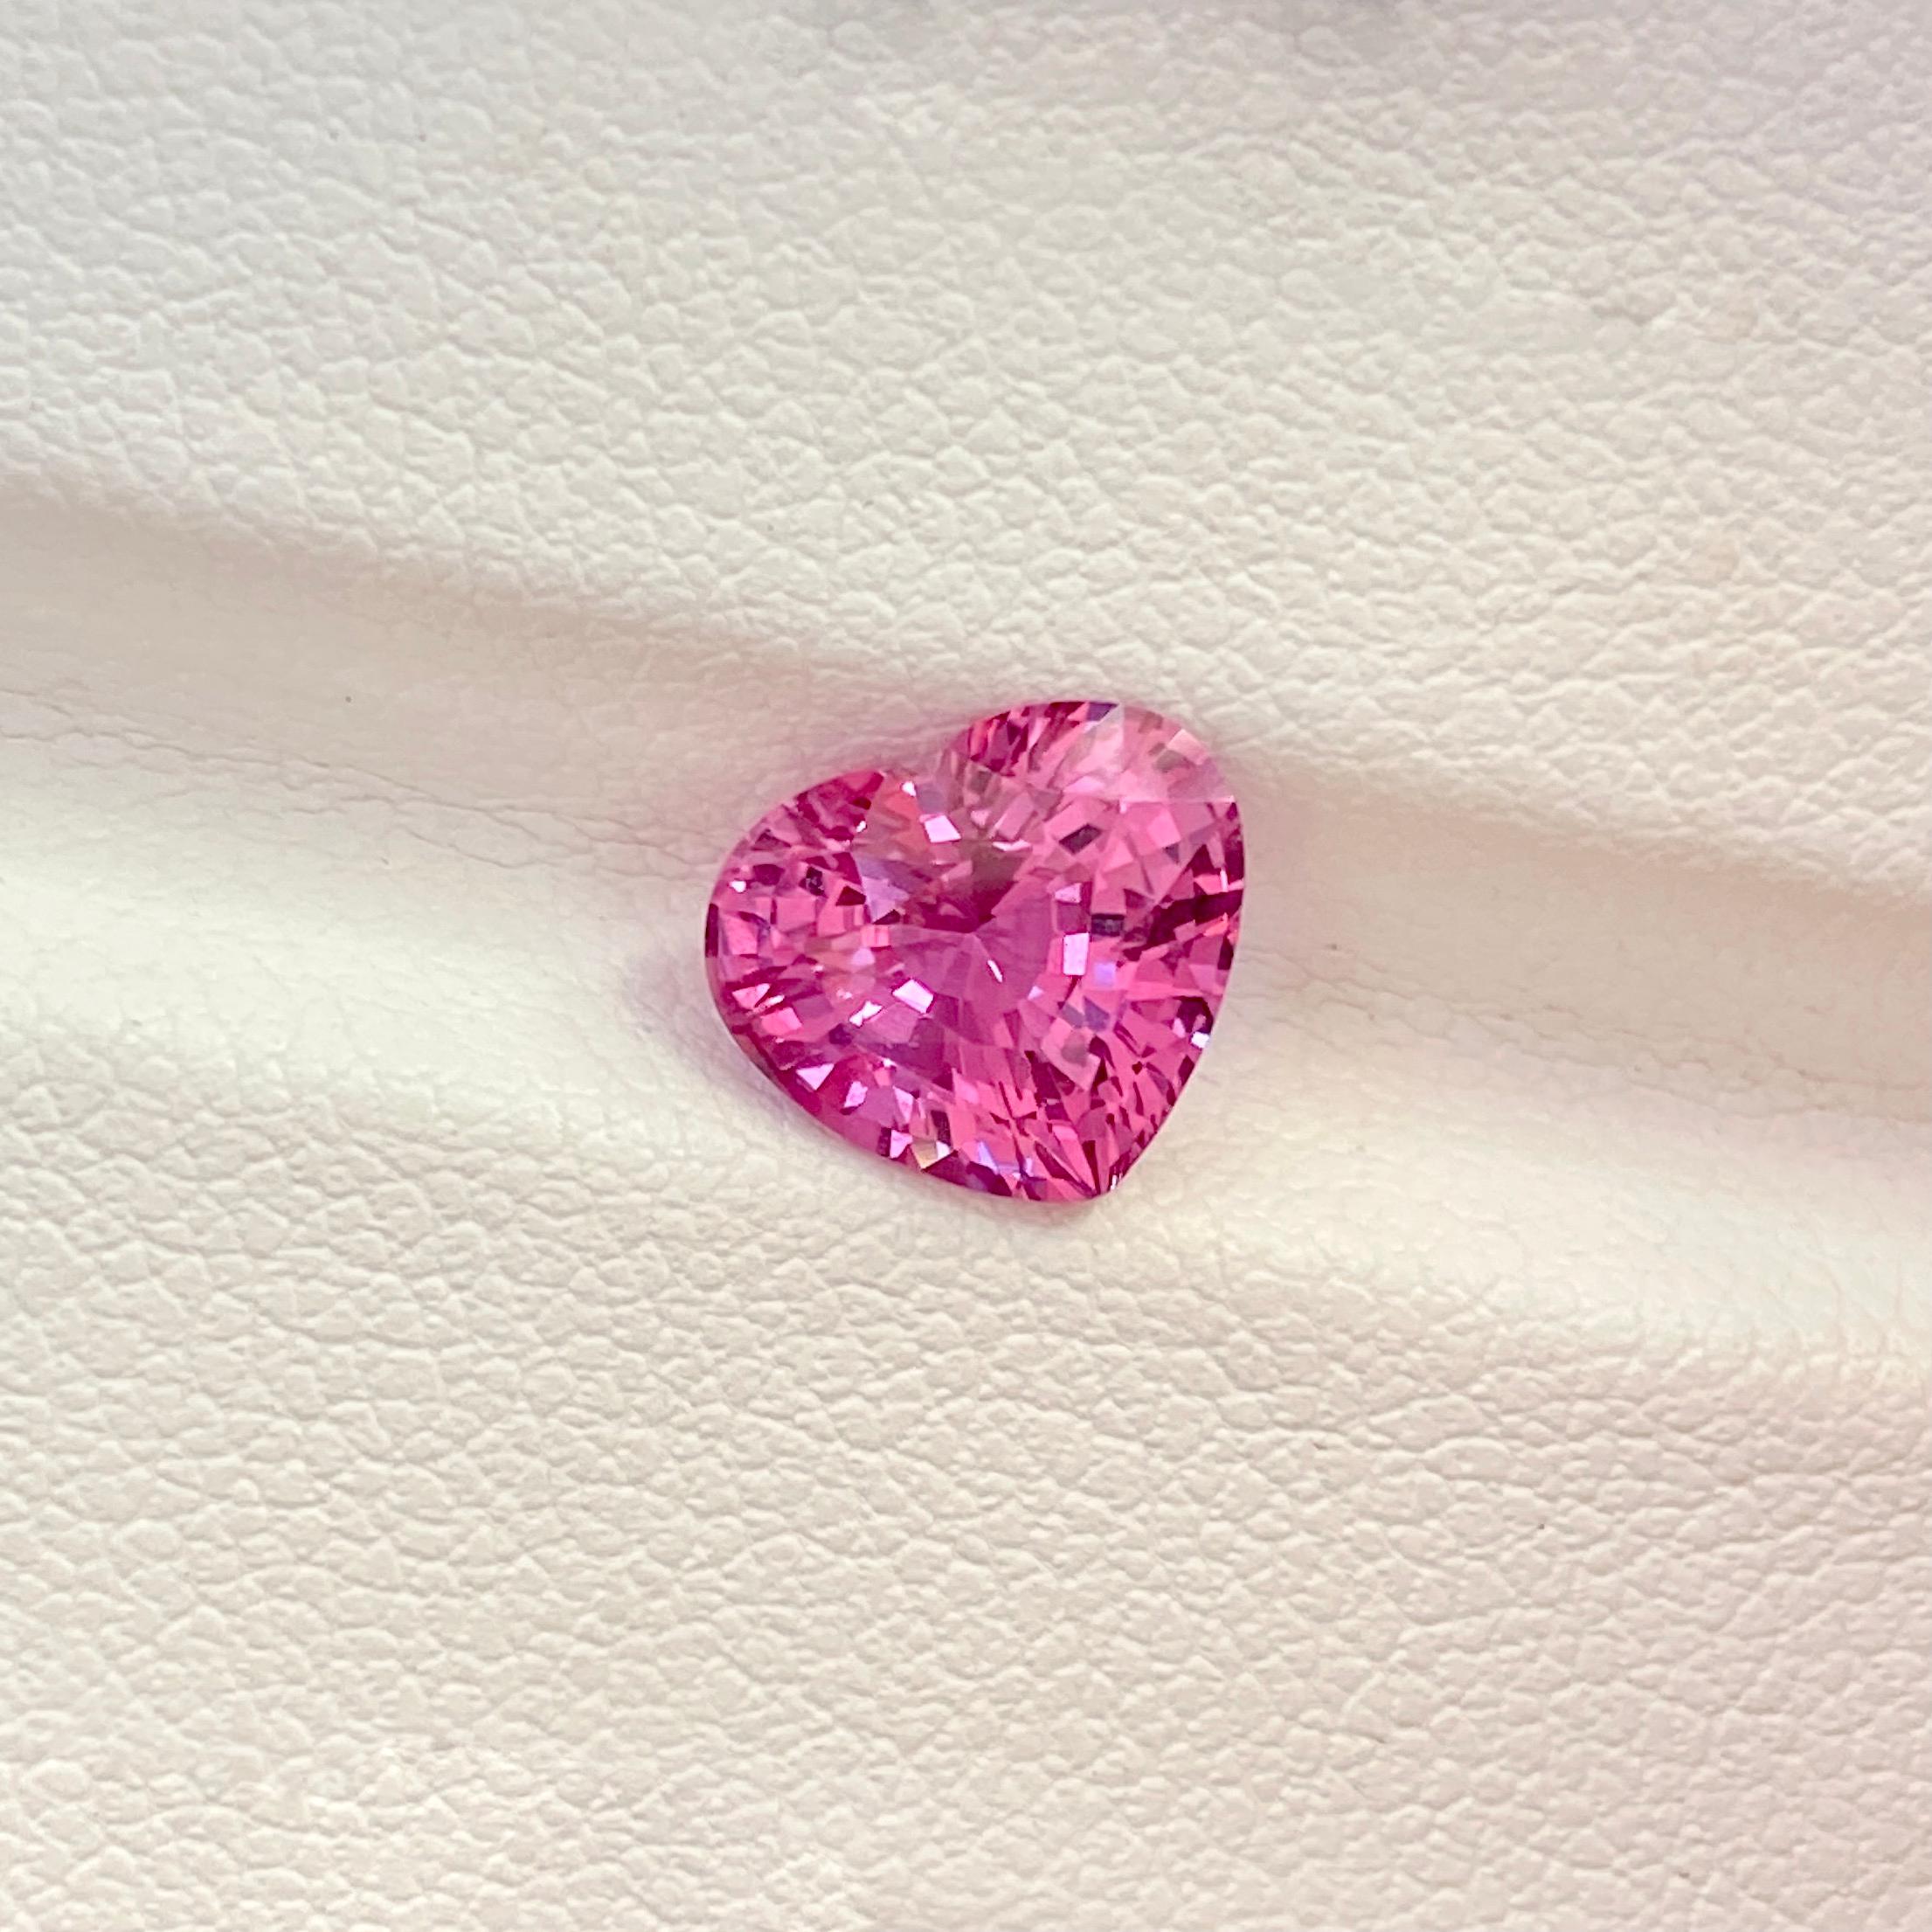 Your heart will skip a beat with this over 2.5 carat heart shaped vivid pink sapphire beauty. A natural sapphire with impossibly vibrant saturated reddish pink colour with high clarity endless sparkle ideal for a bespoke jewellery piece.

This vivid